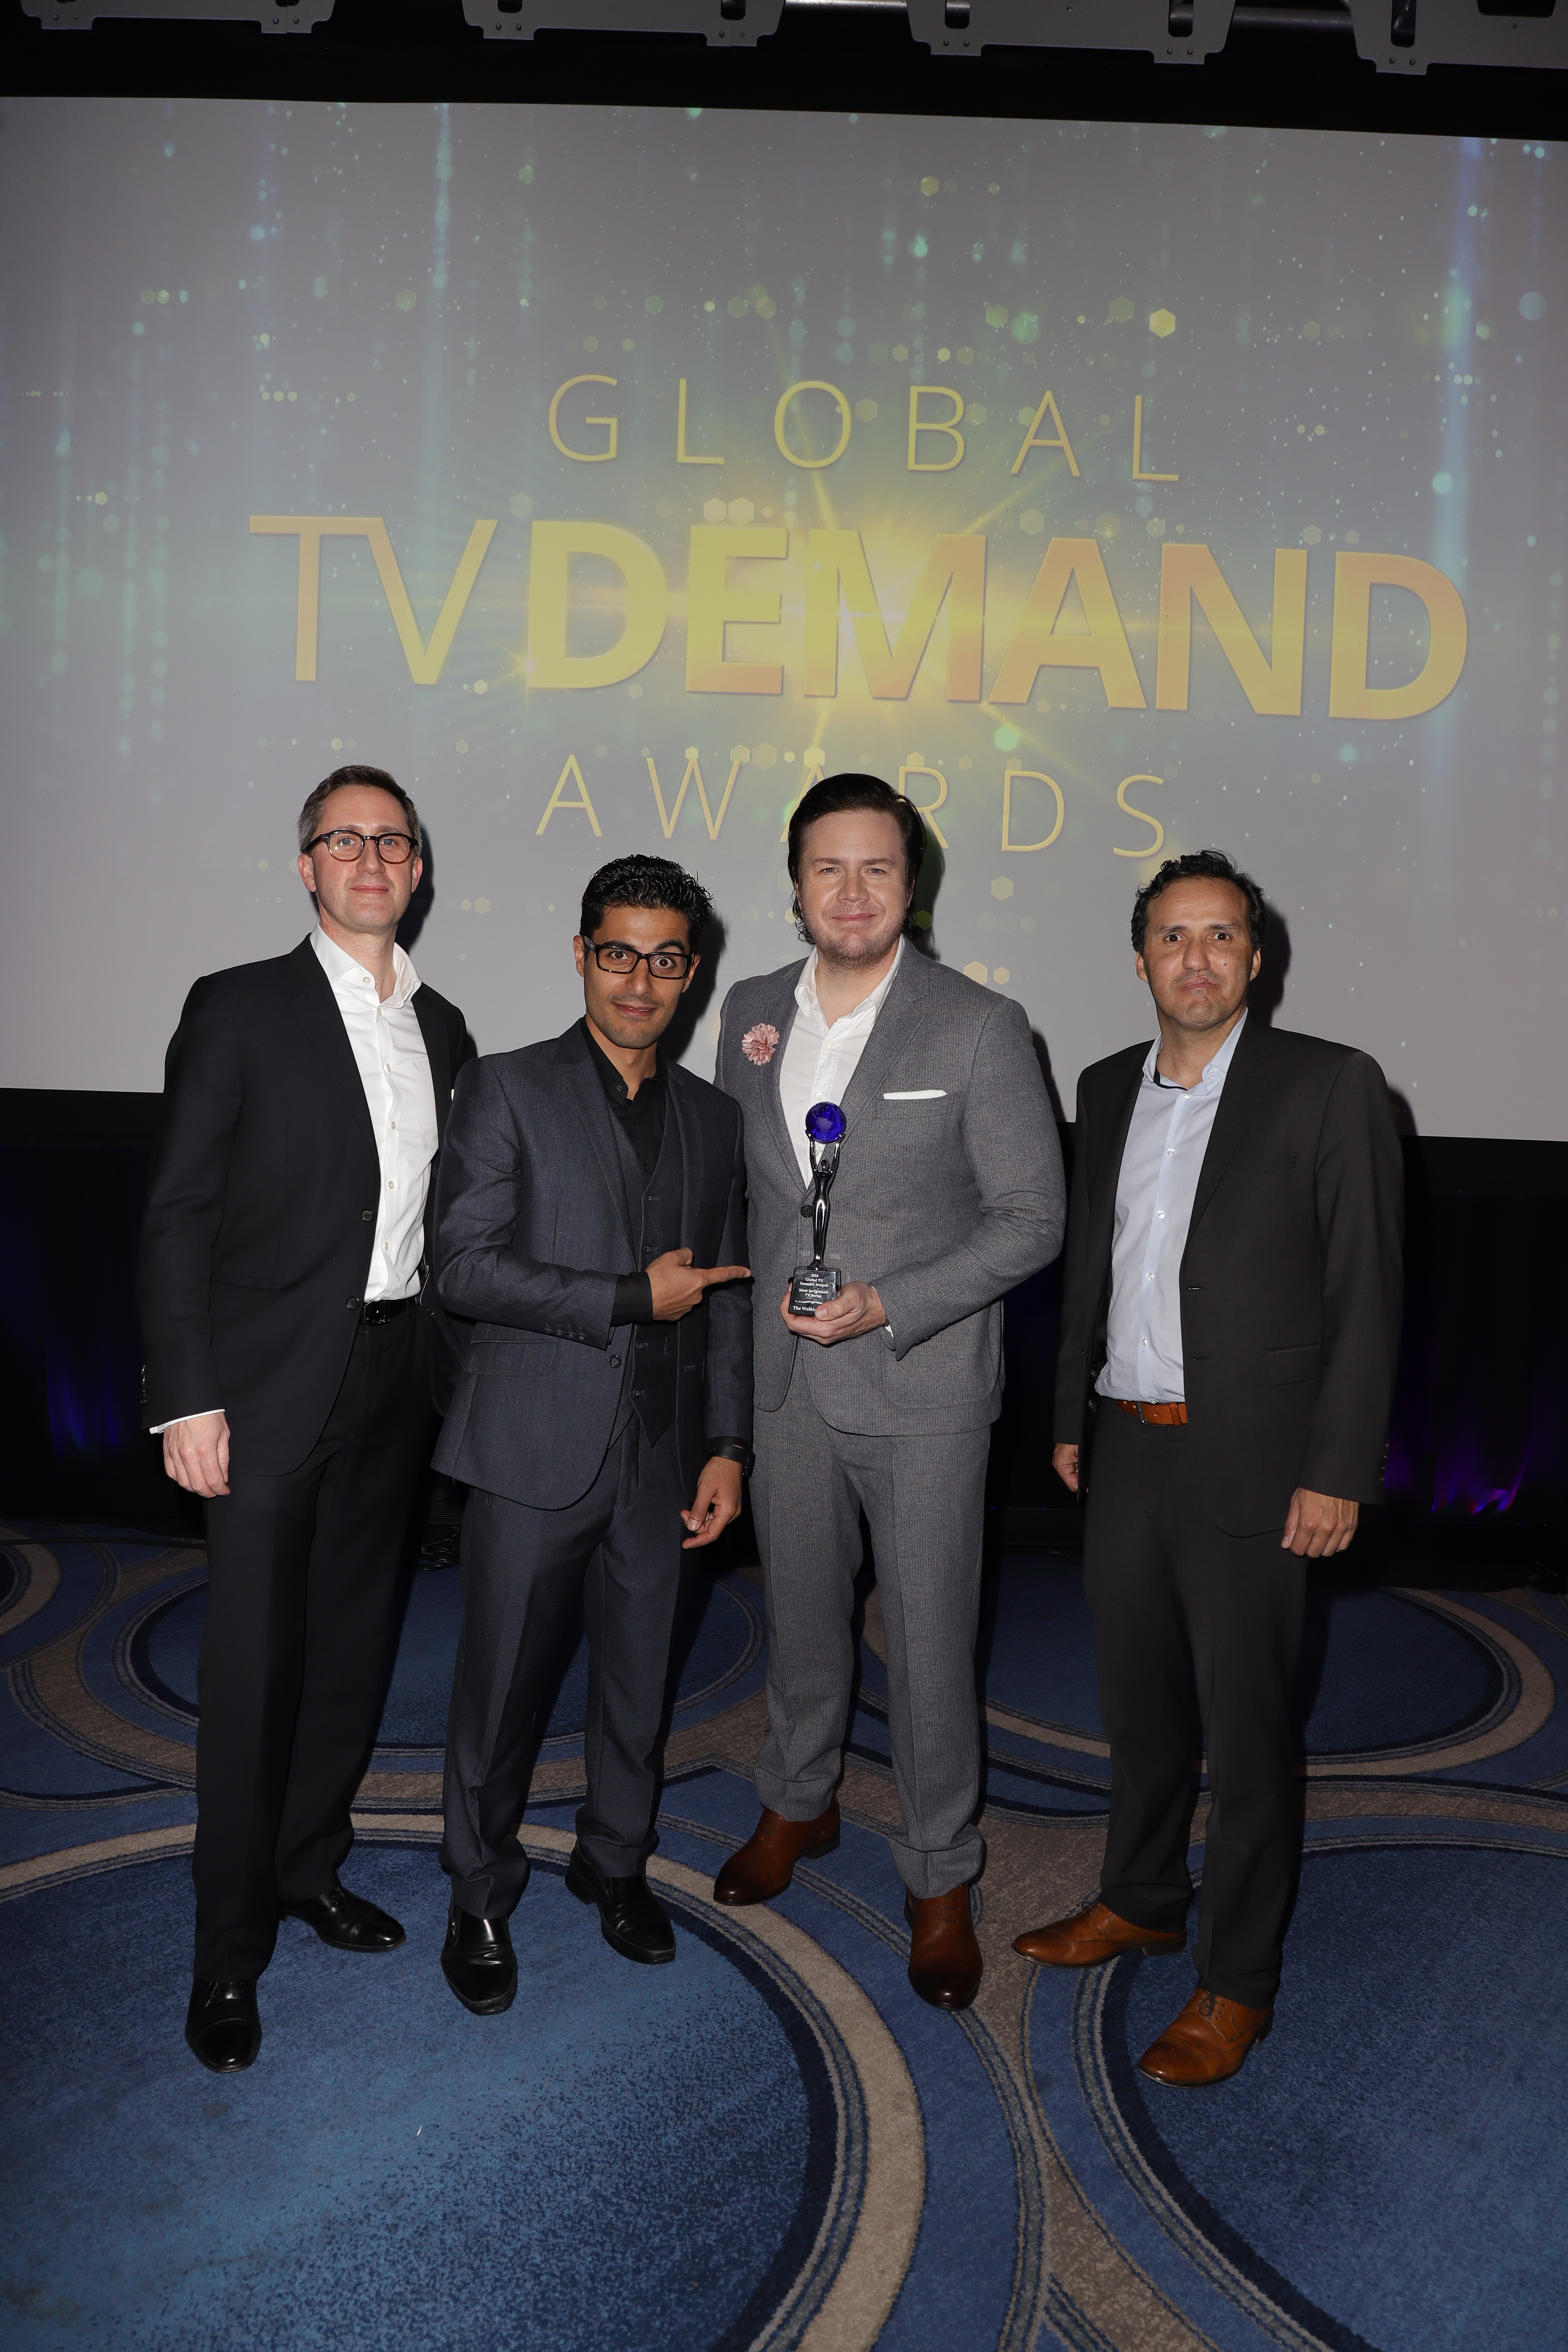 Courtney Williams, Wared Seger, Josh McDermitt and Alejandro Rojas at the Global TV Demand Awards. (Photo by John Parra/Getty Images for Parrot Analytics)